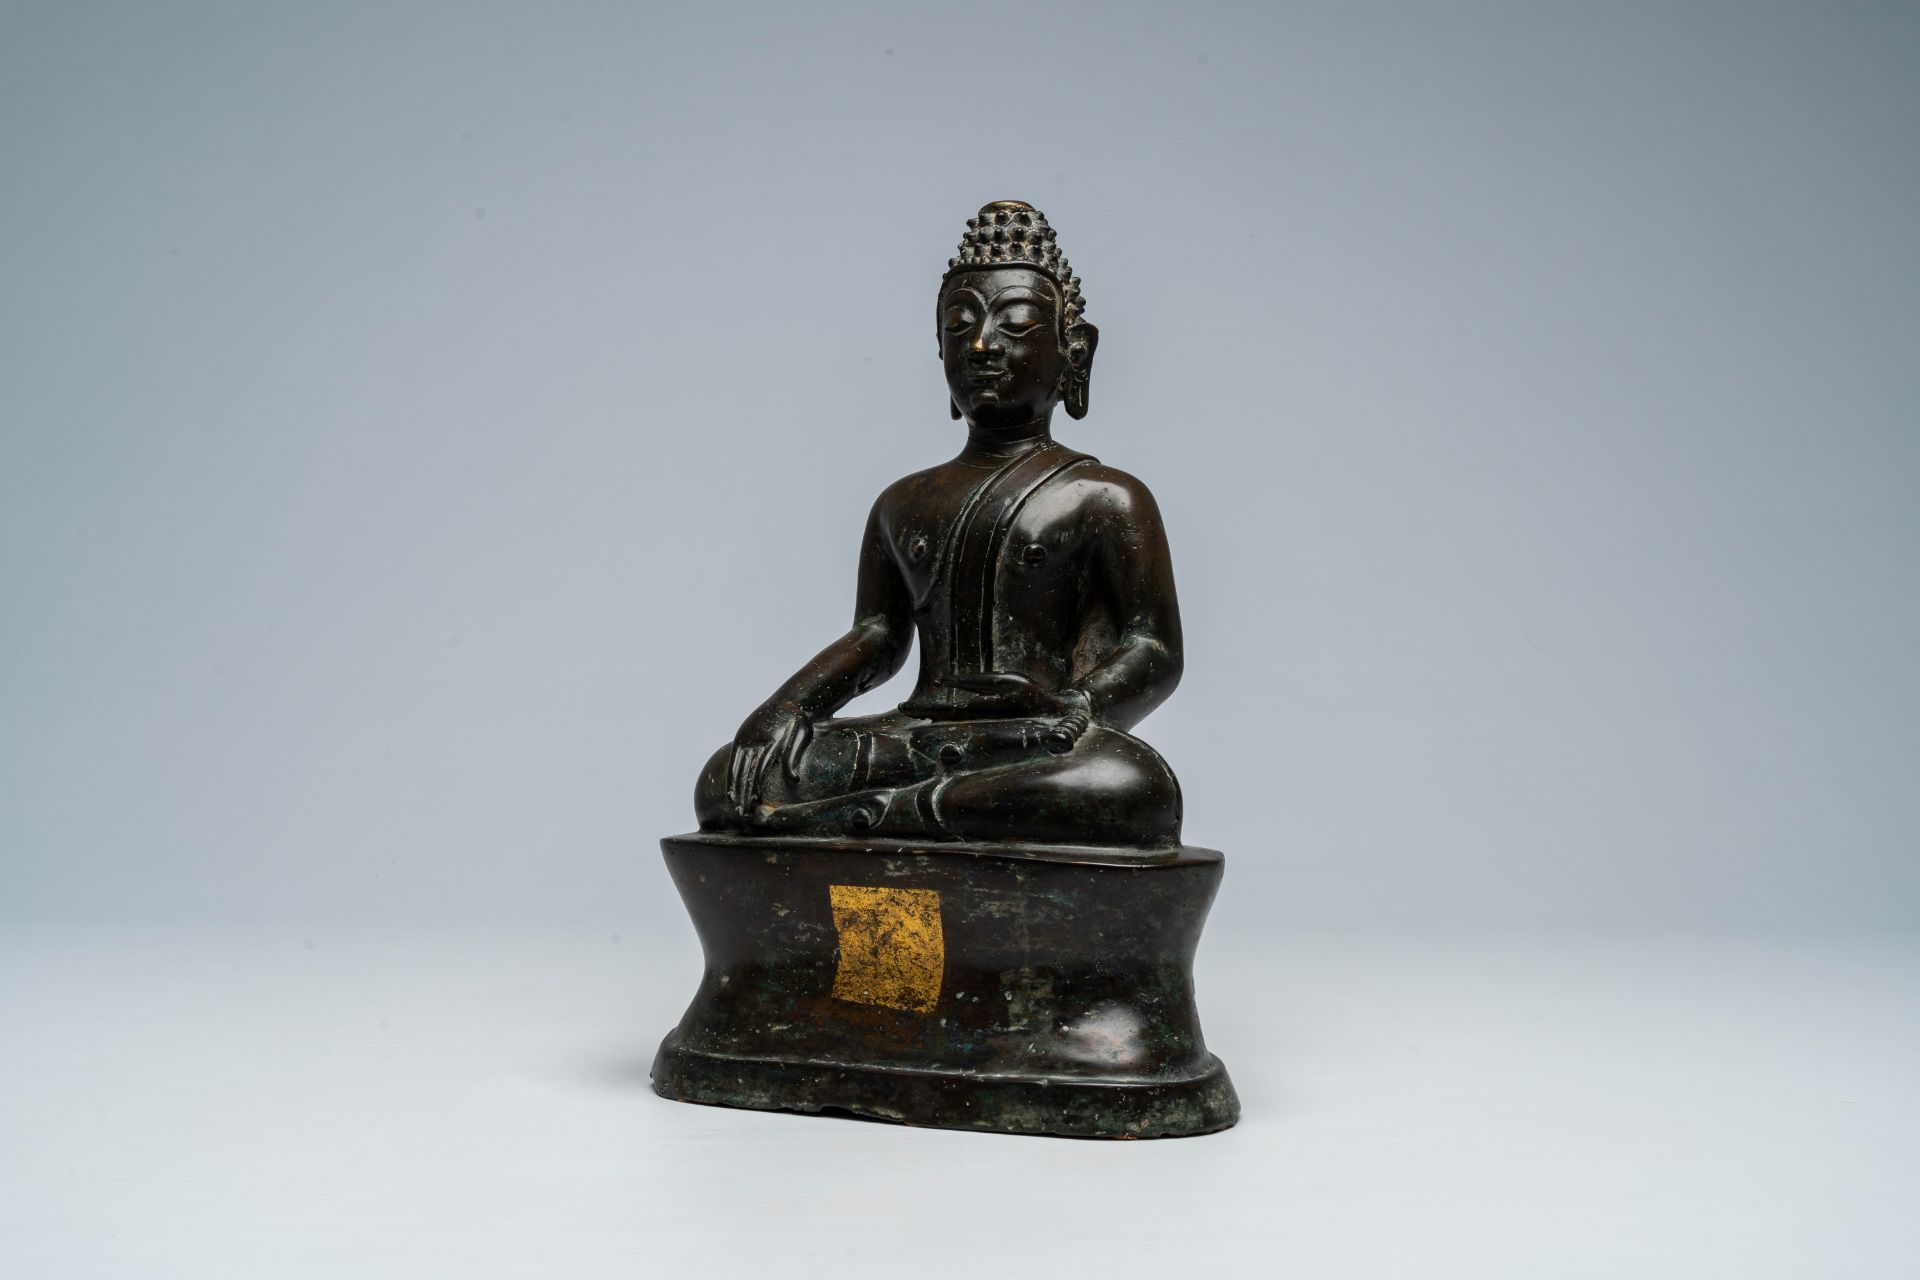 A Thai patinated bronze figure of a seated Buddha, possibly 16th C.